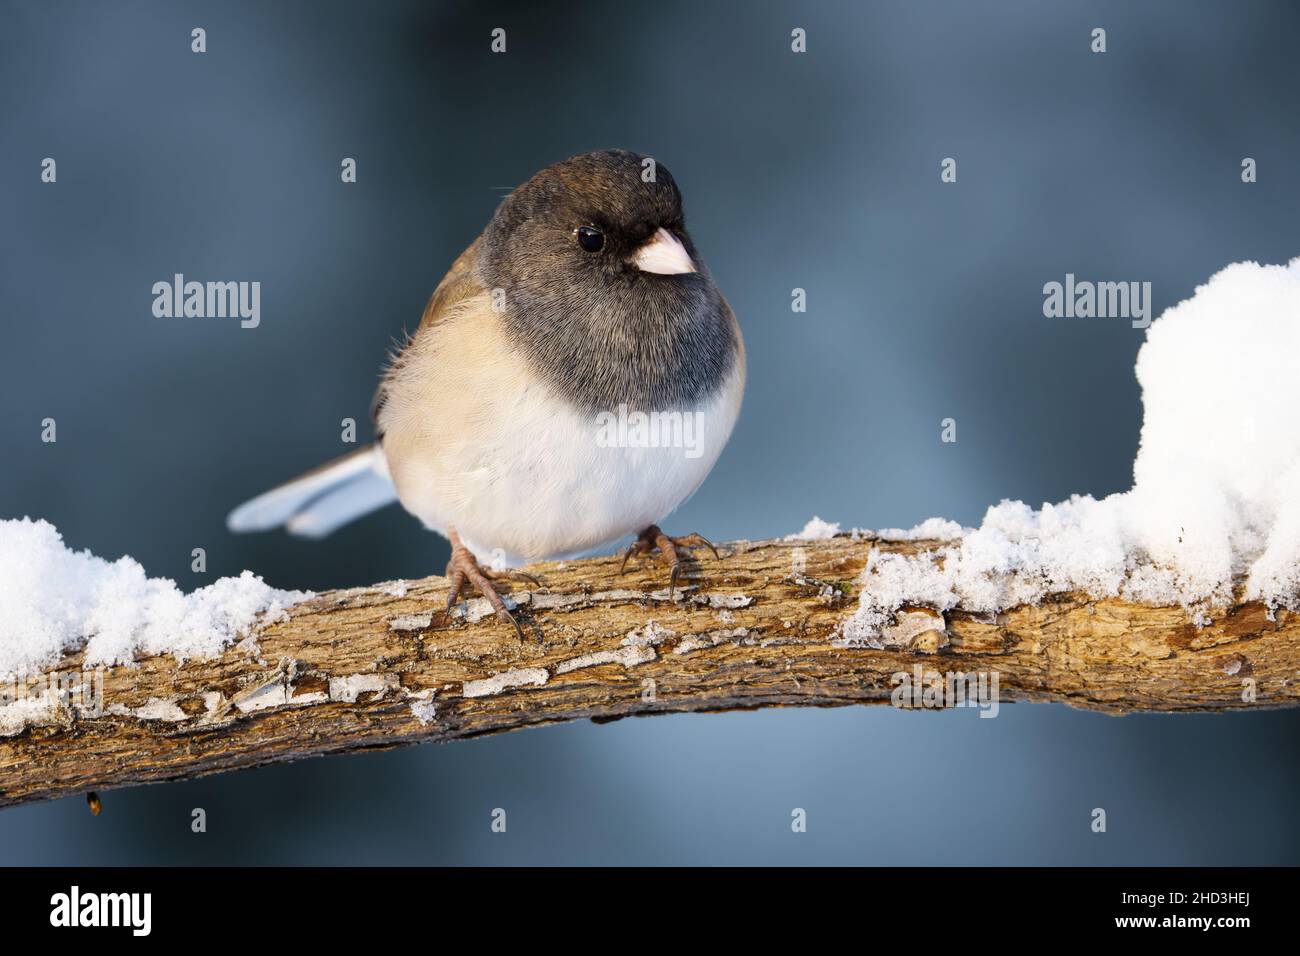 Male dark-eyed junco perched on snowy branch, Snohomish, Washington, USA Stock Photo